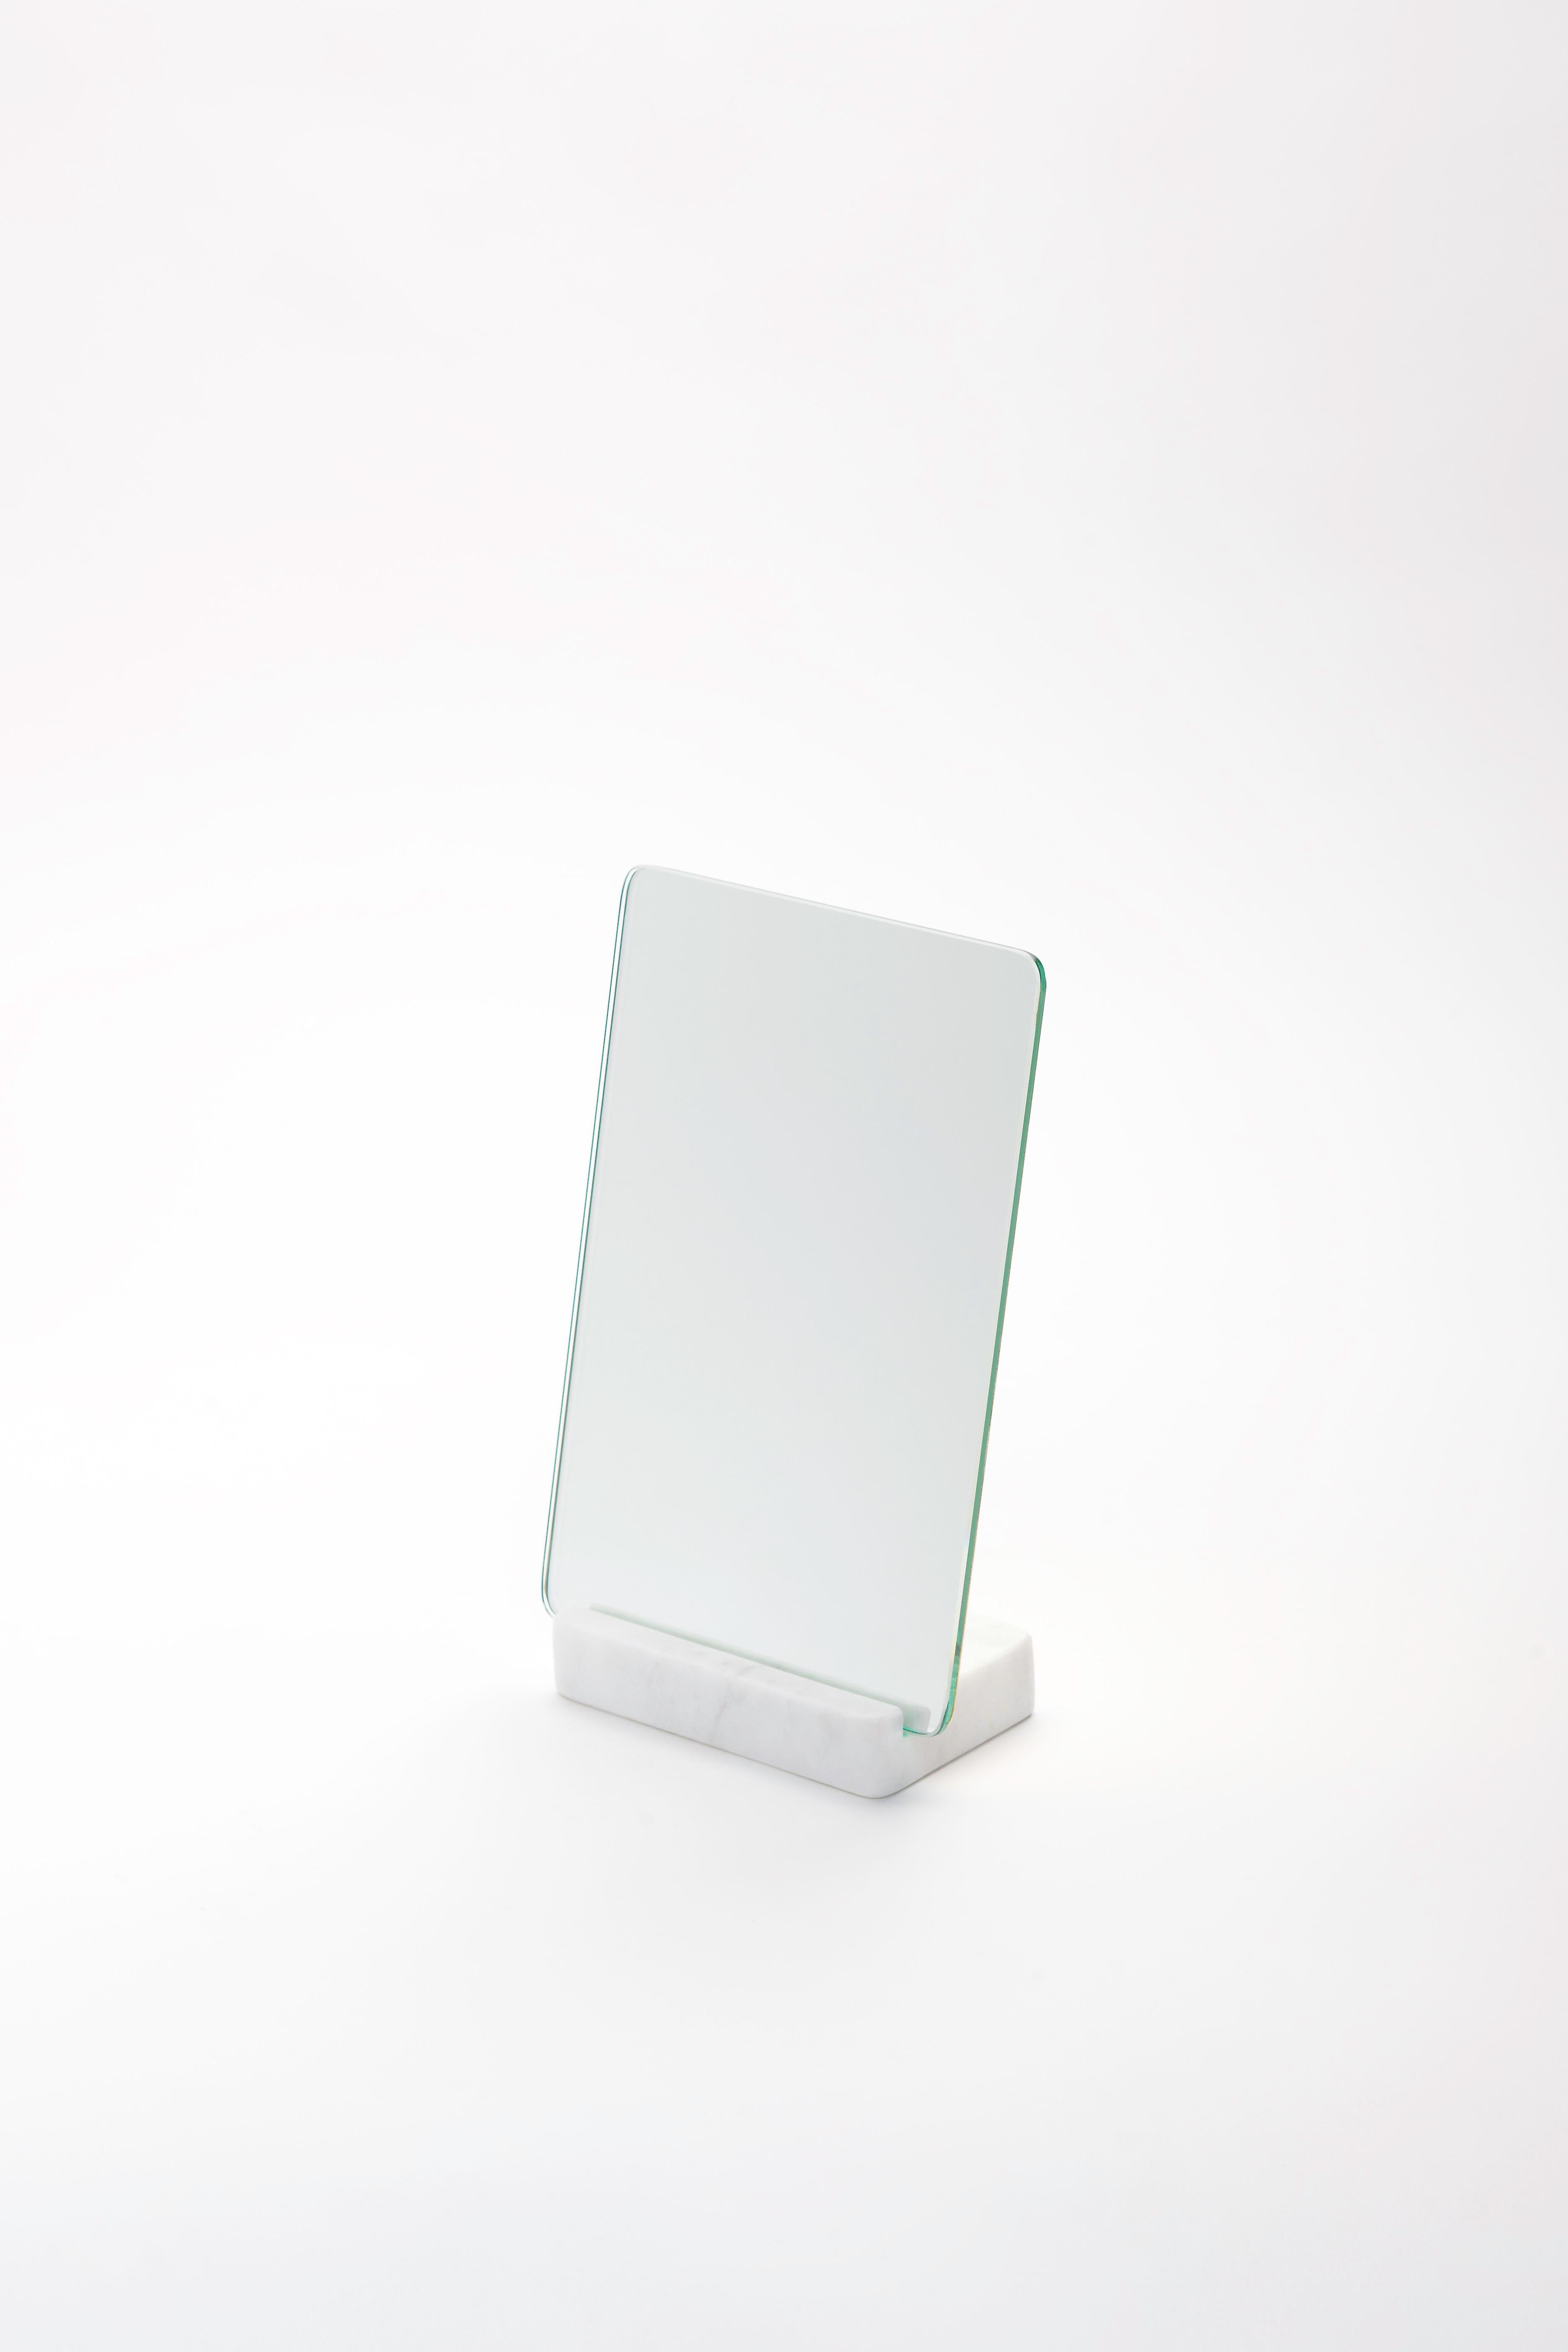 Marblelous mirror by Joseph Vila Capdevila
Material: Carrara marble, brass, mirror
Dimensions: 18 x 29 x 9 cm
Weight: 2 kg

Luxurious mirror in two separated parts: the base, made with premium Carrara marble, and mirror, that can be placed on the